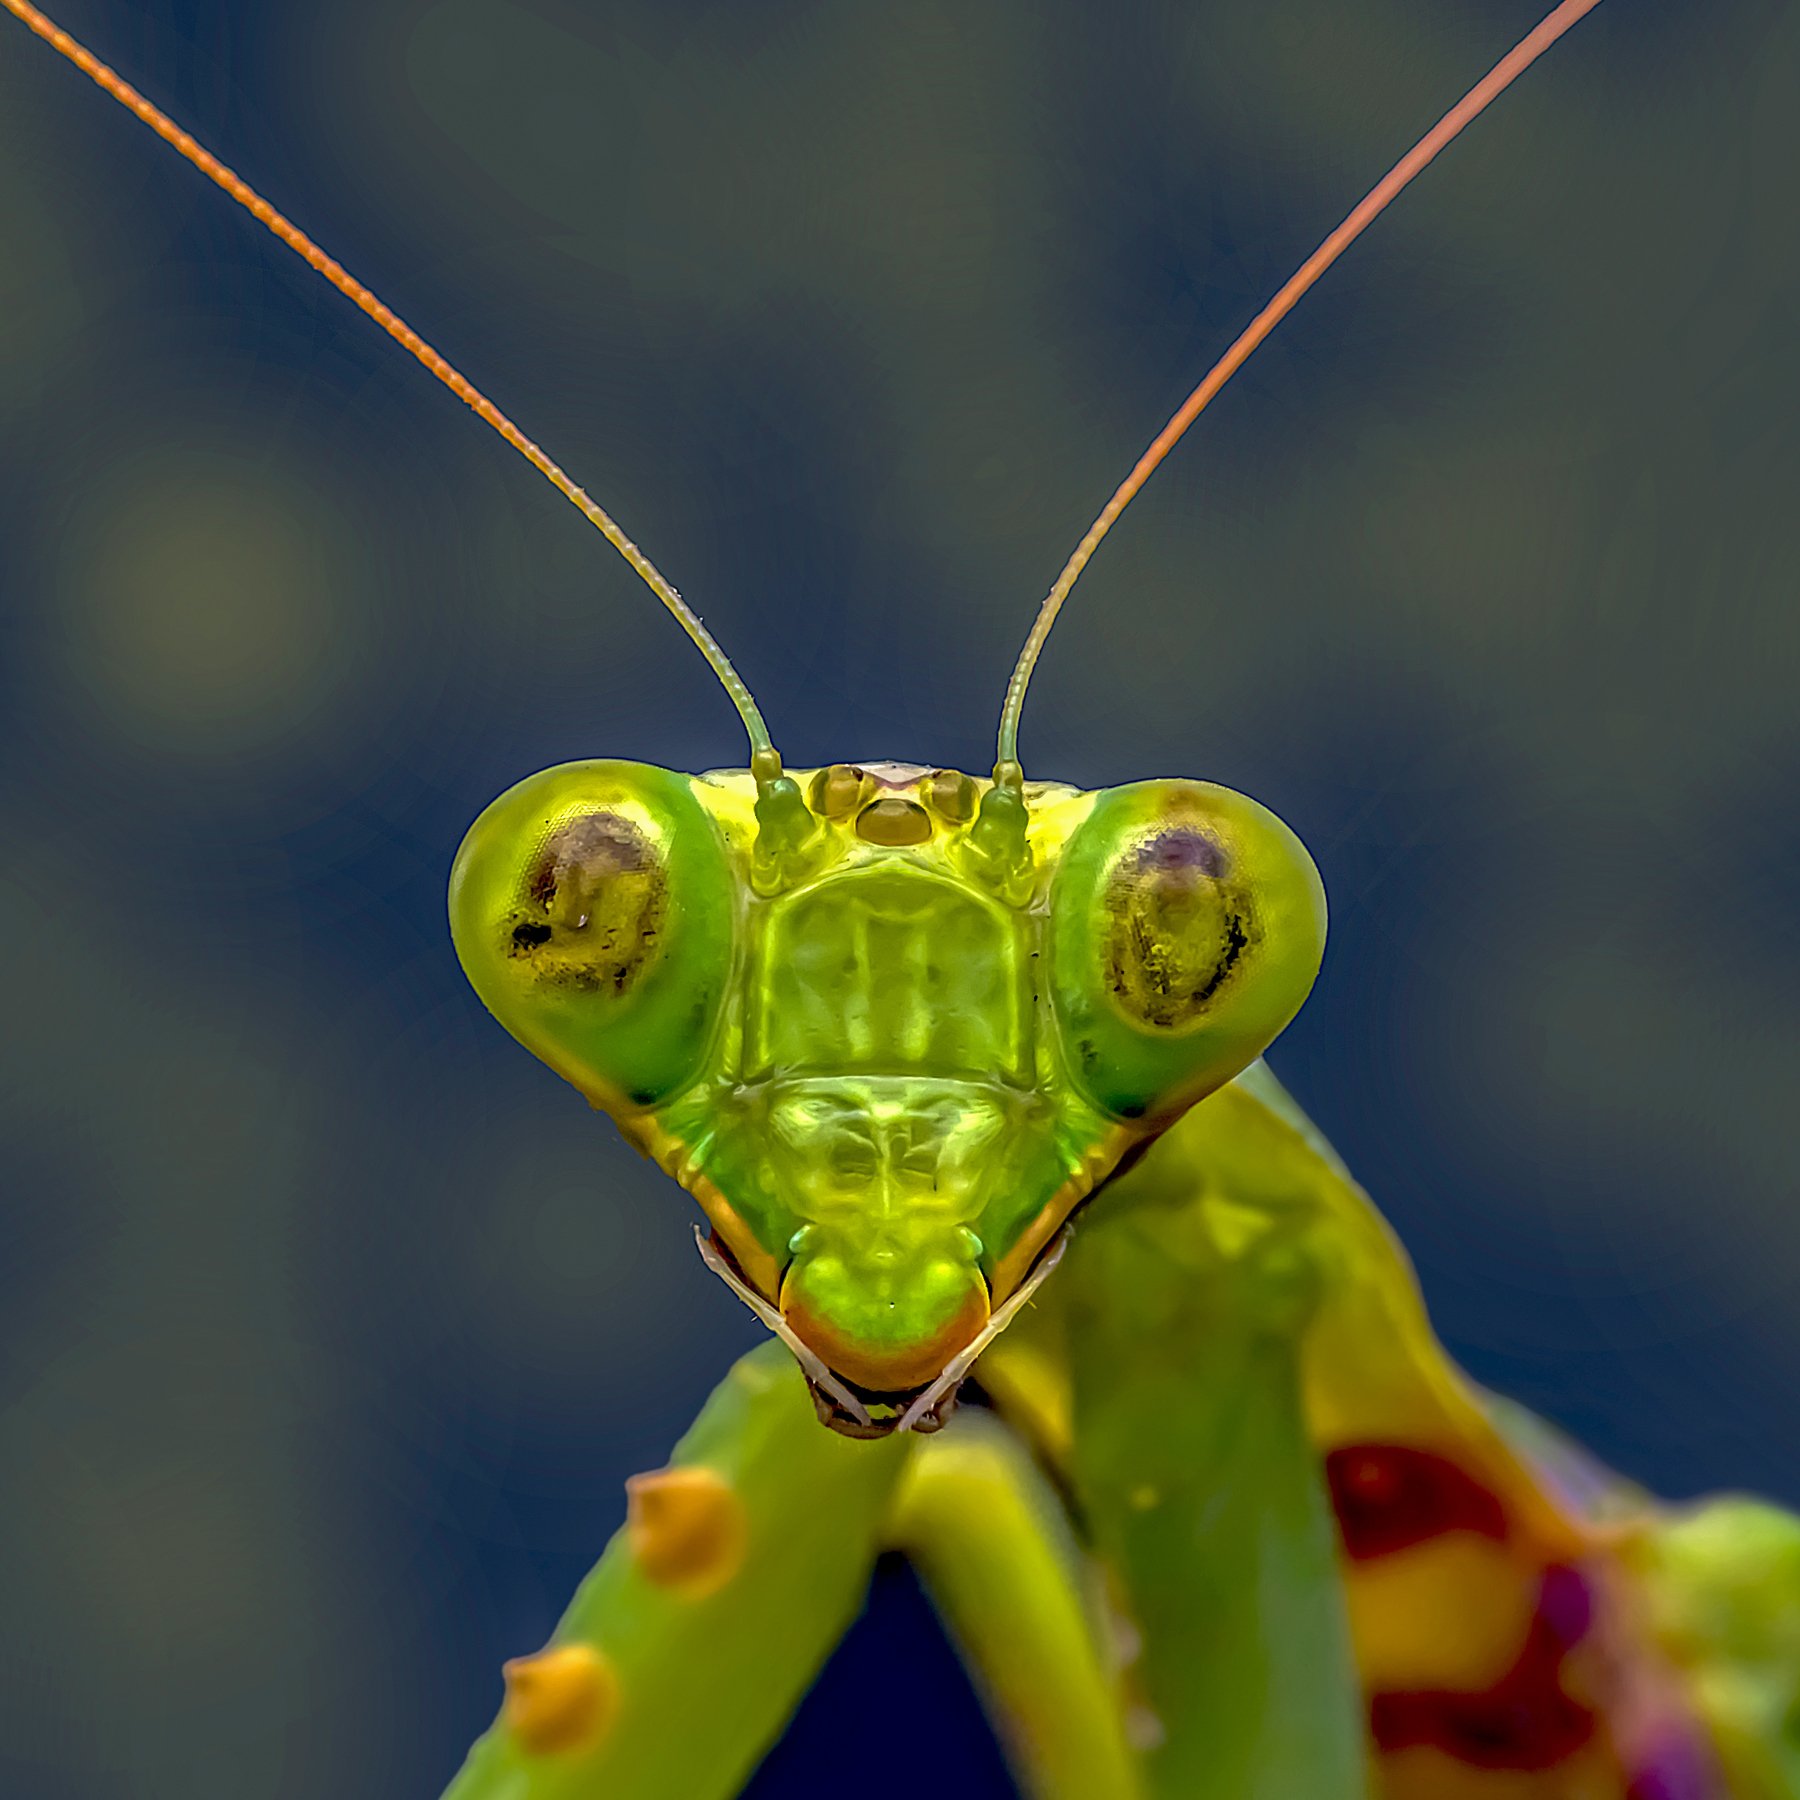 mantis. face, potrait, insect, animal, macro, small, nature, natural, outdoor, eyes, prey, danger, beautiful, beauty, light, green, color, NeCoTi ChonTin